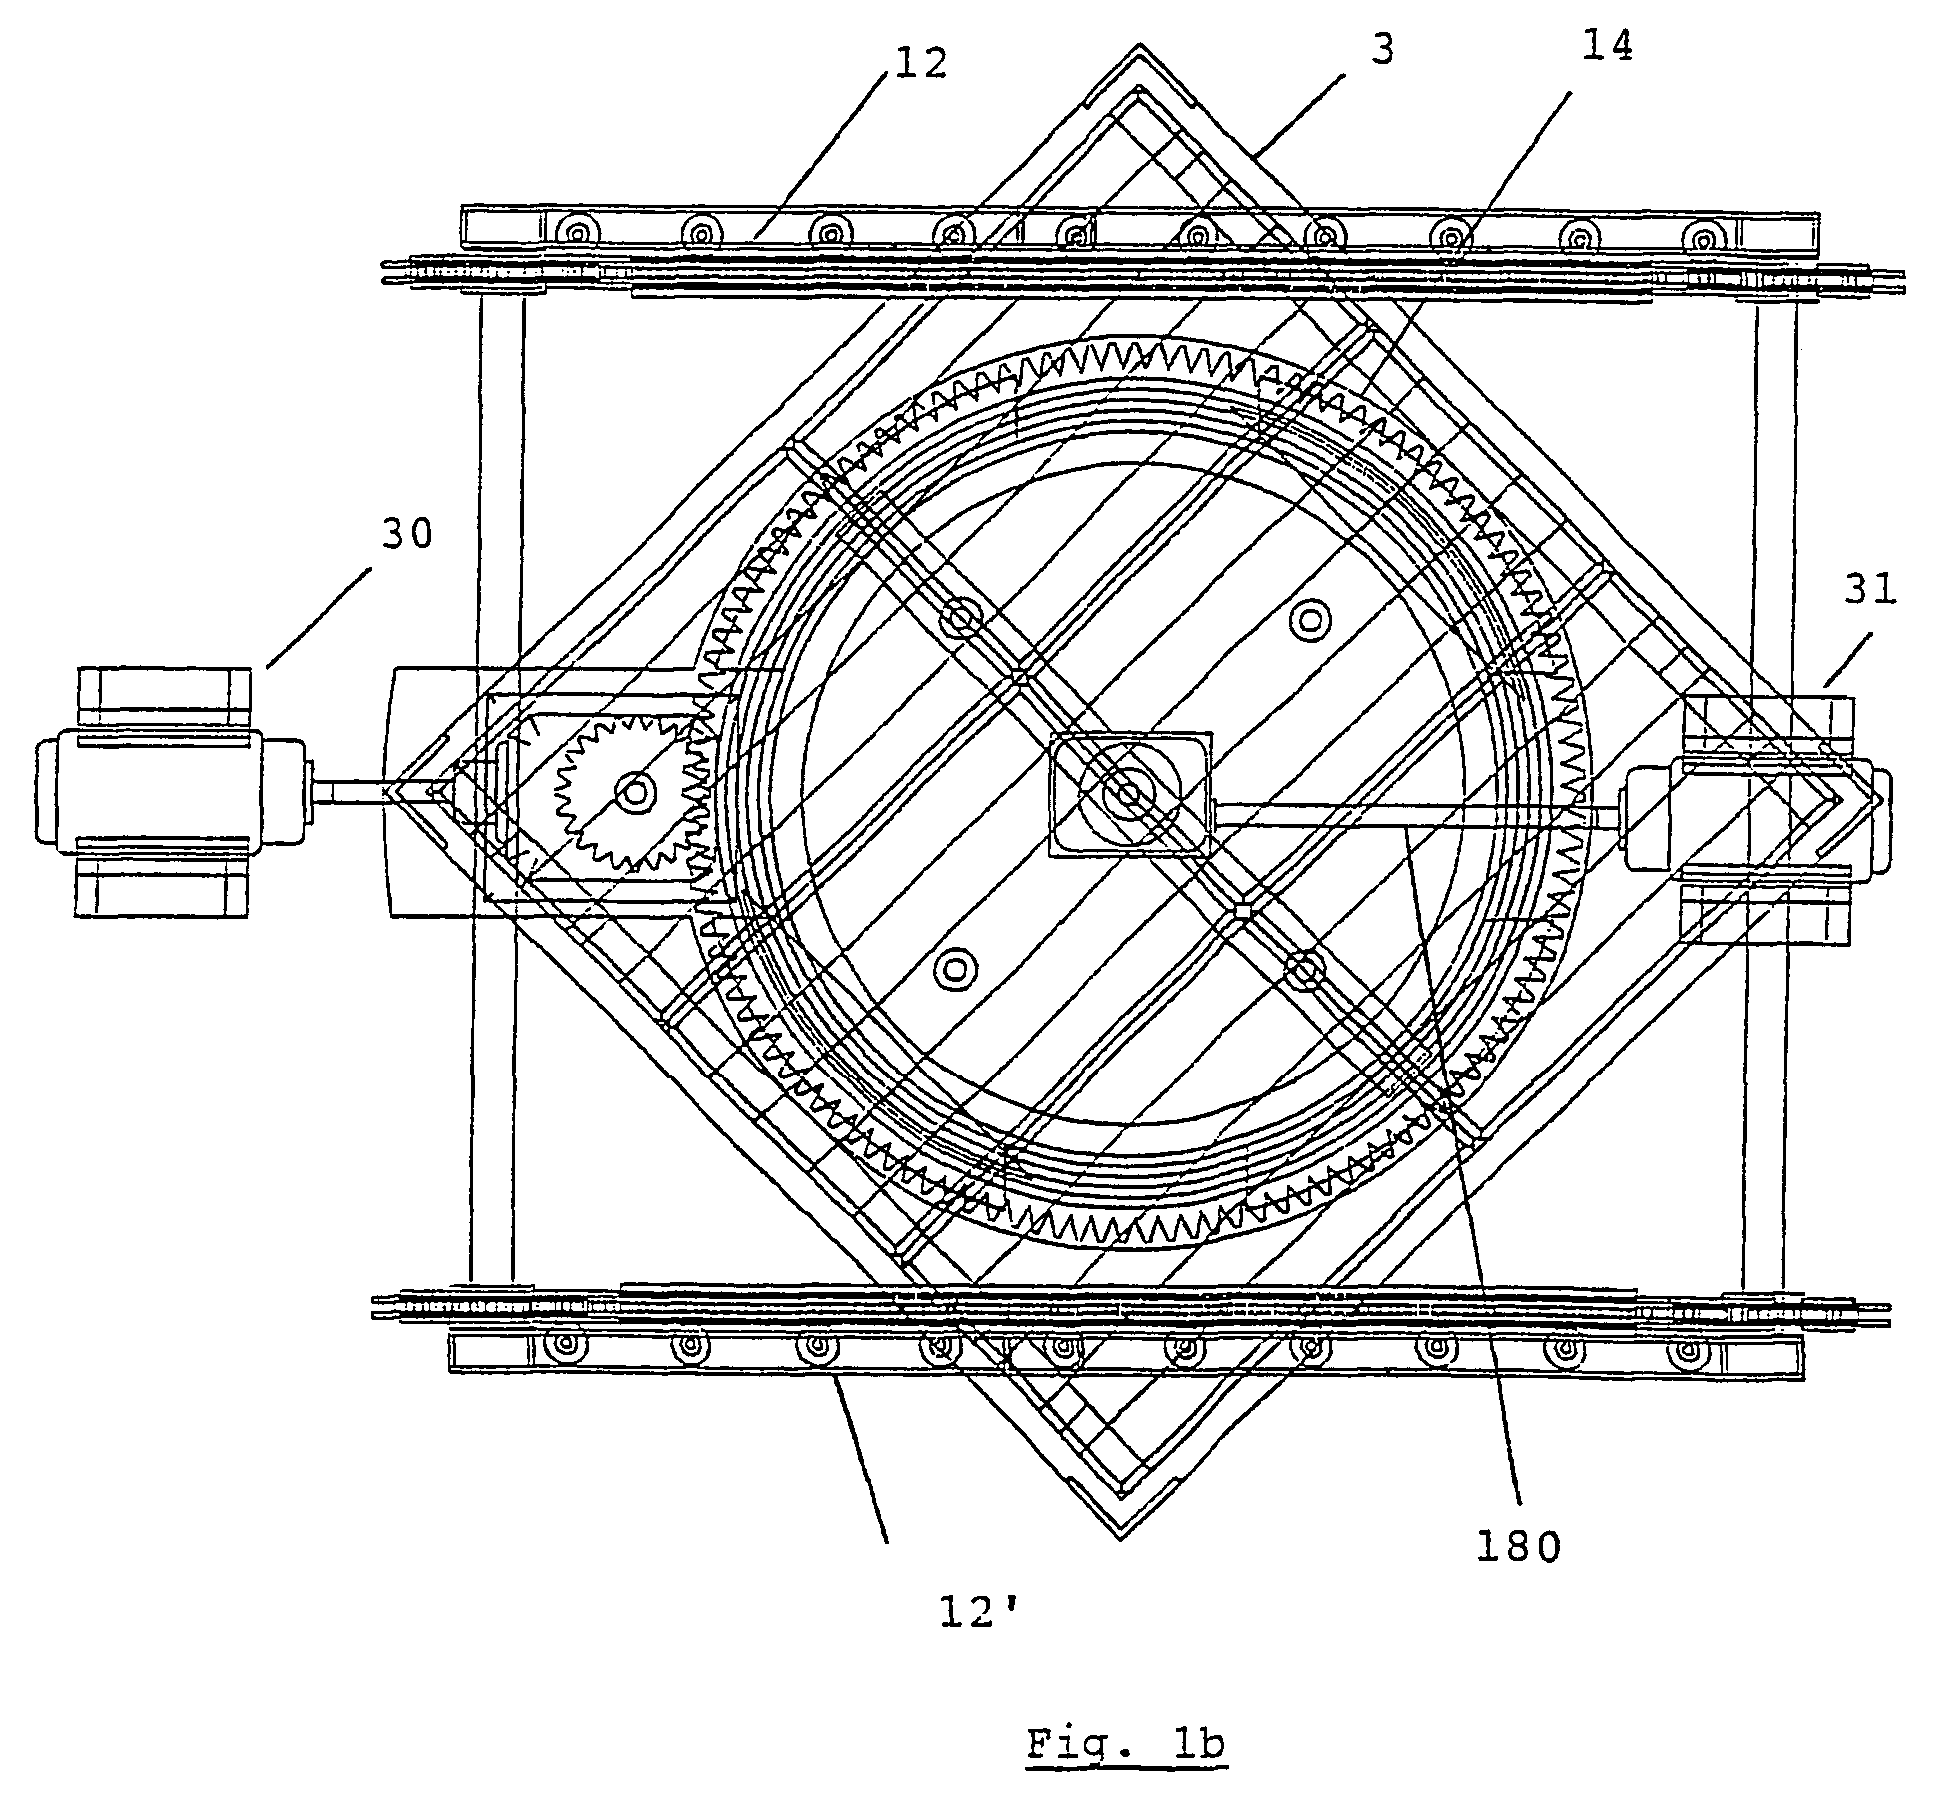 Process and apparatus for irradiating product pallets